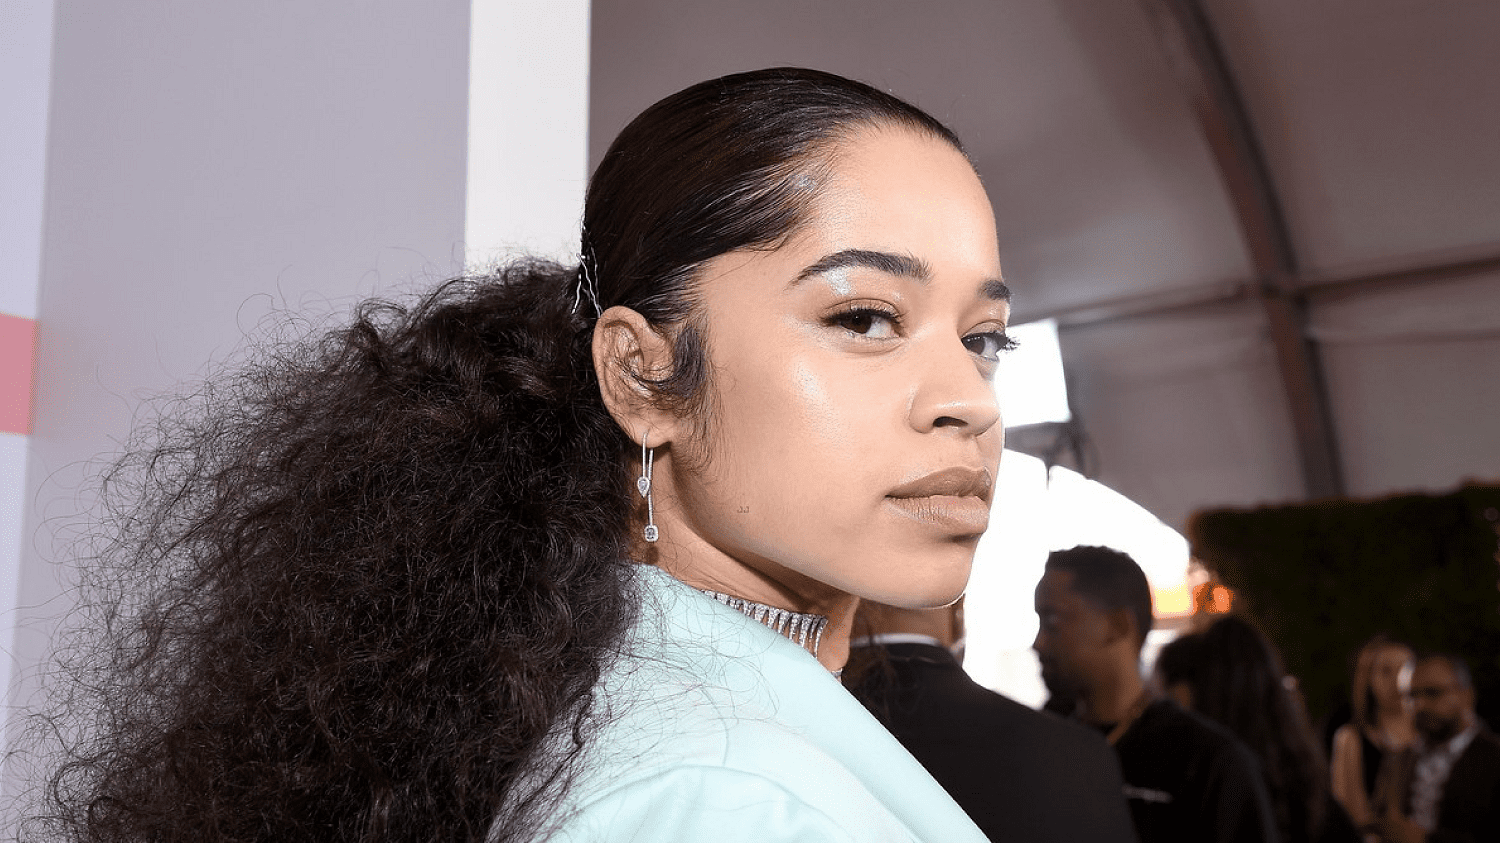 Hairstyle Inspiration From Singer: Ella Mai.